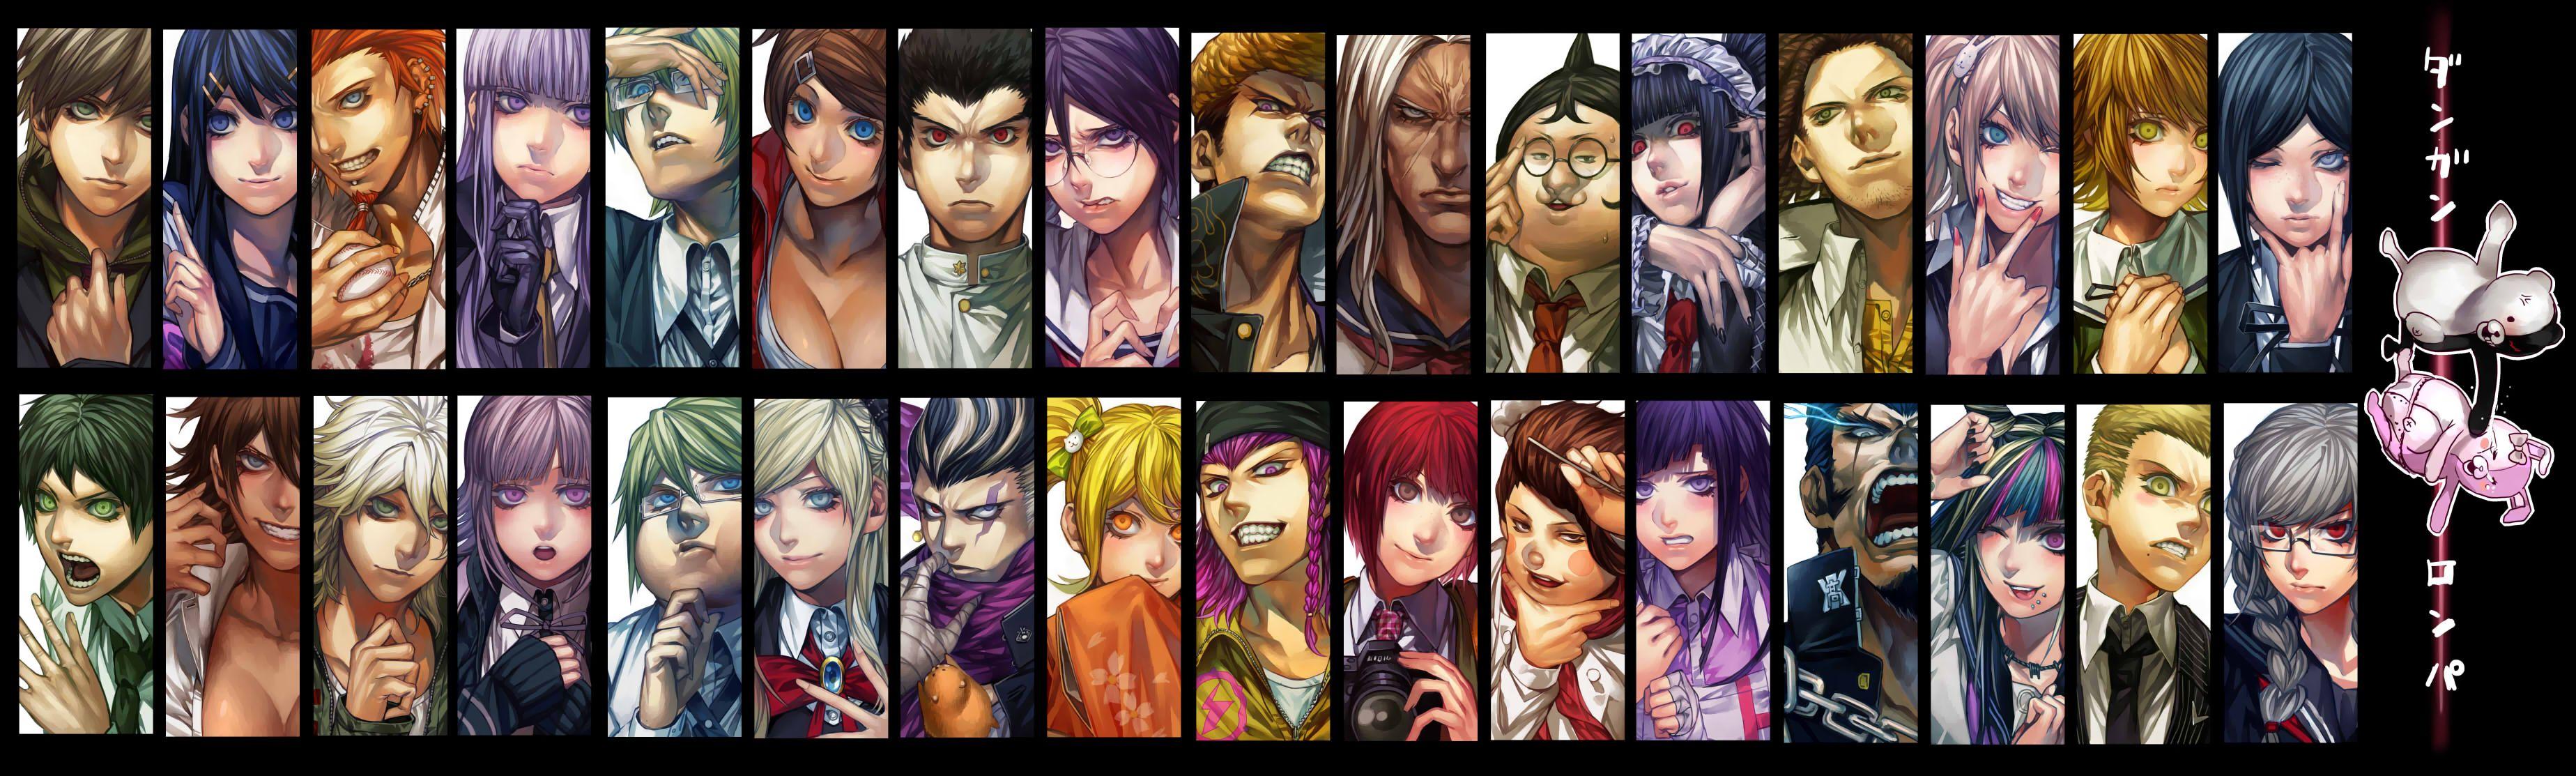 1000+ image about The dangan ronpa page